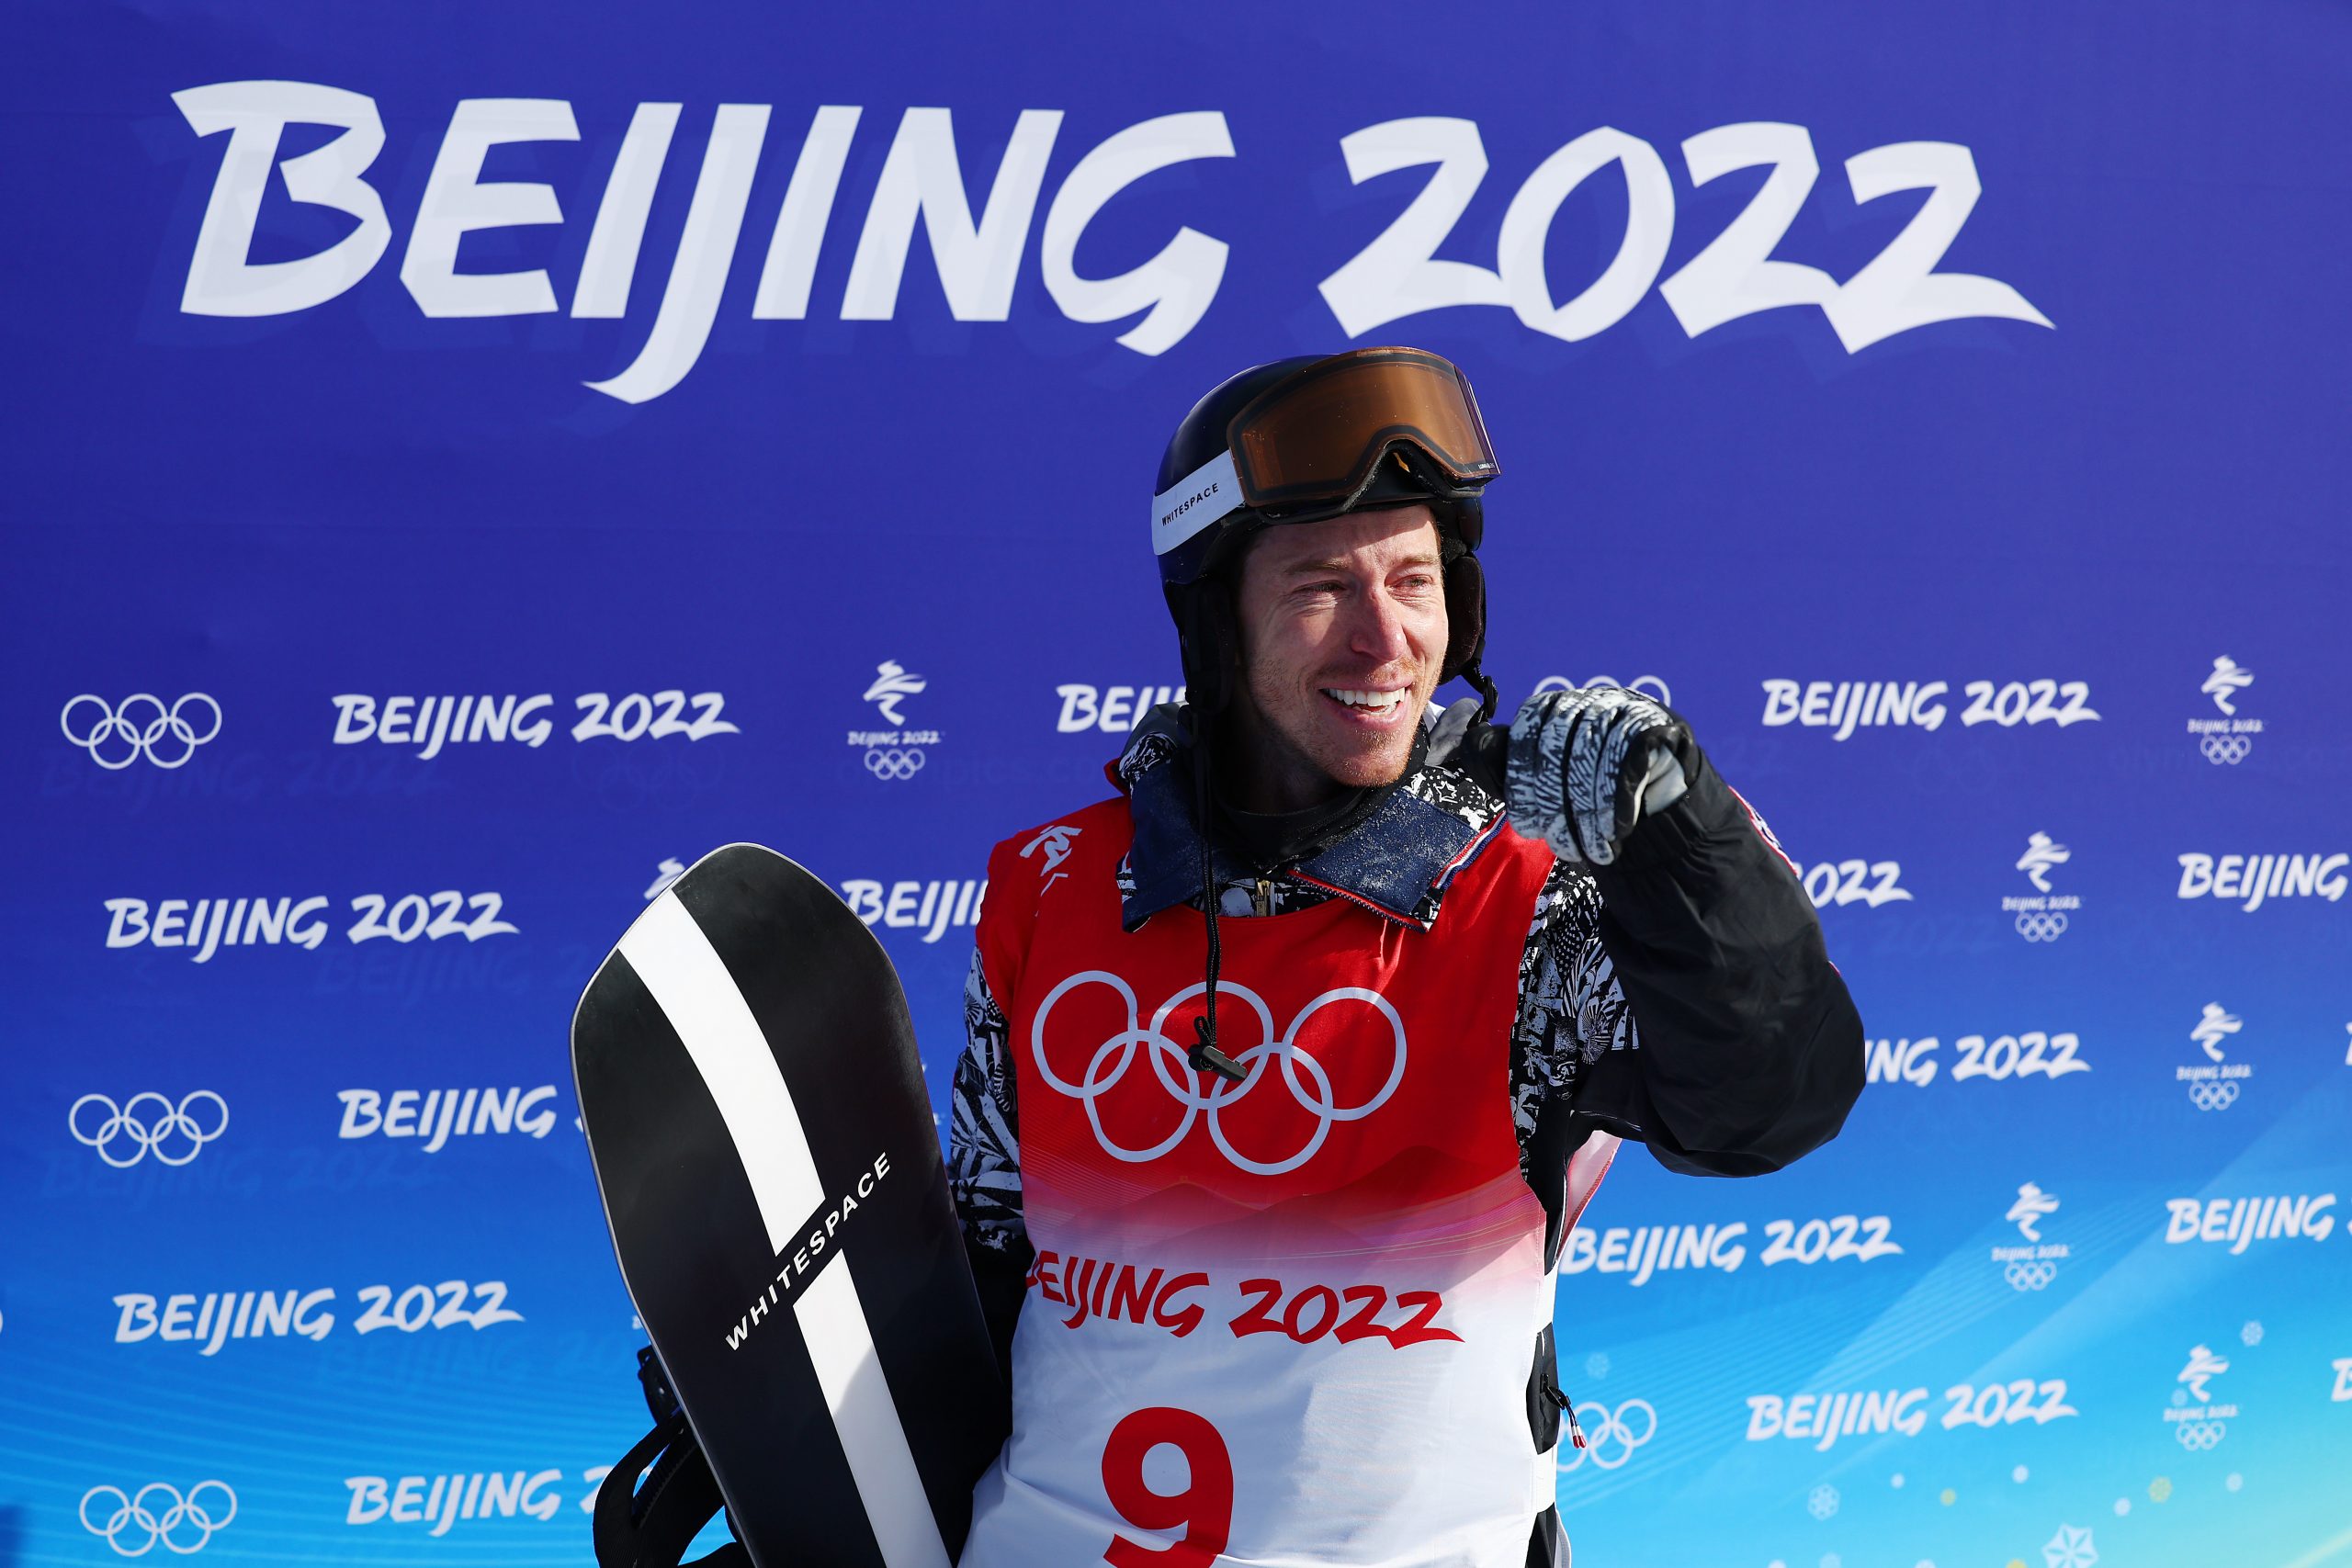 Powder to Panes: Snowboarder Shaun White to deliver keynote at